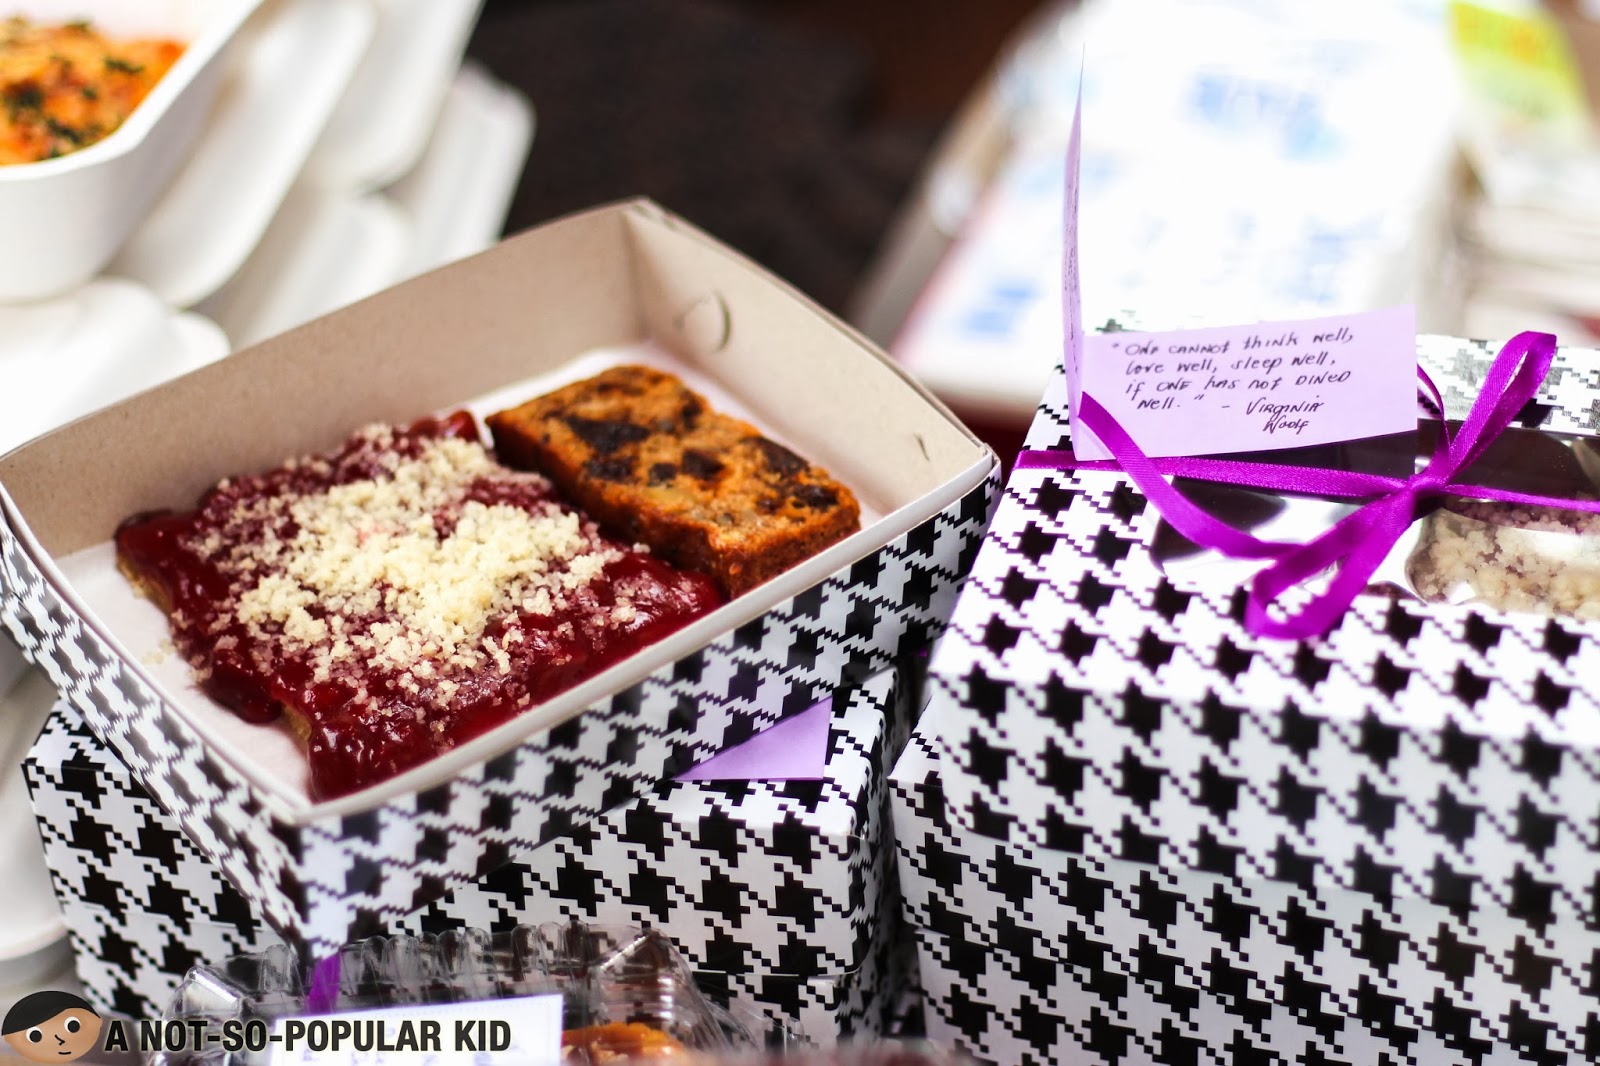 Chynna Ortaleza's Cherry Pizza and Banana Prune Bread in an Adorable Package